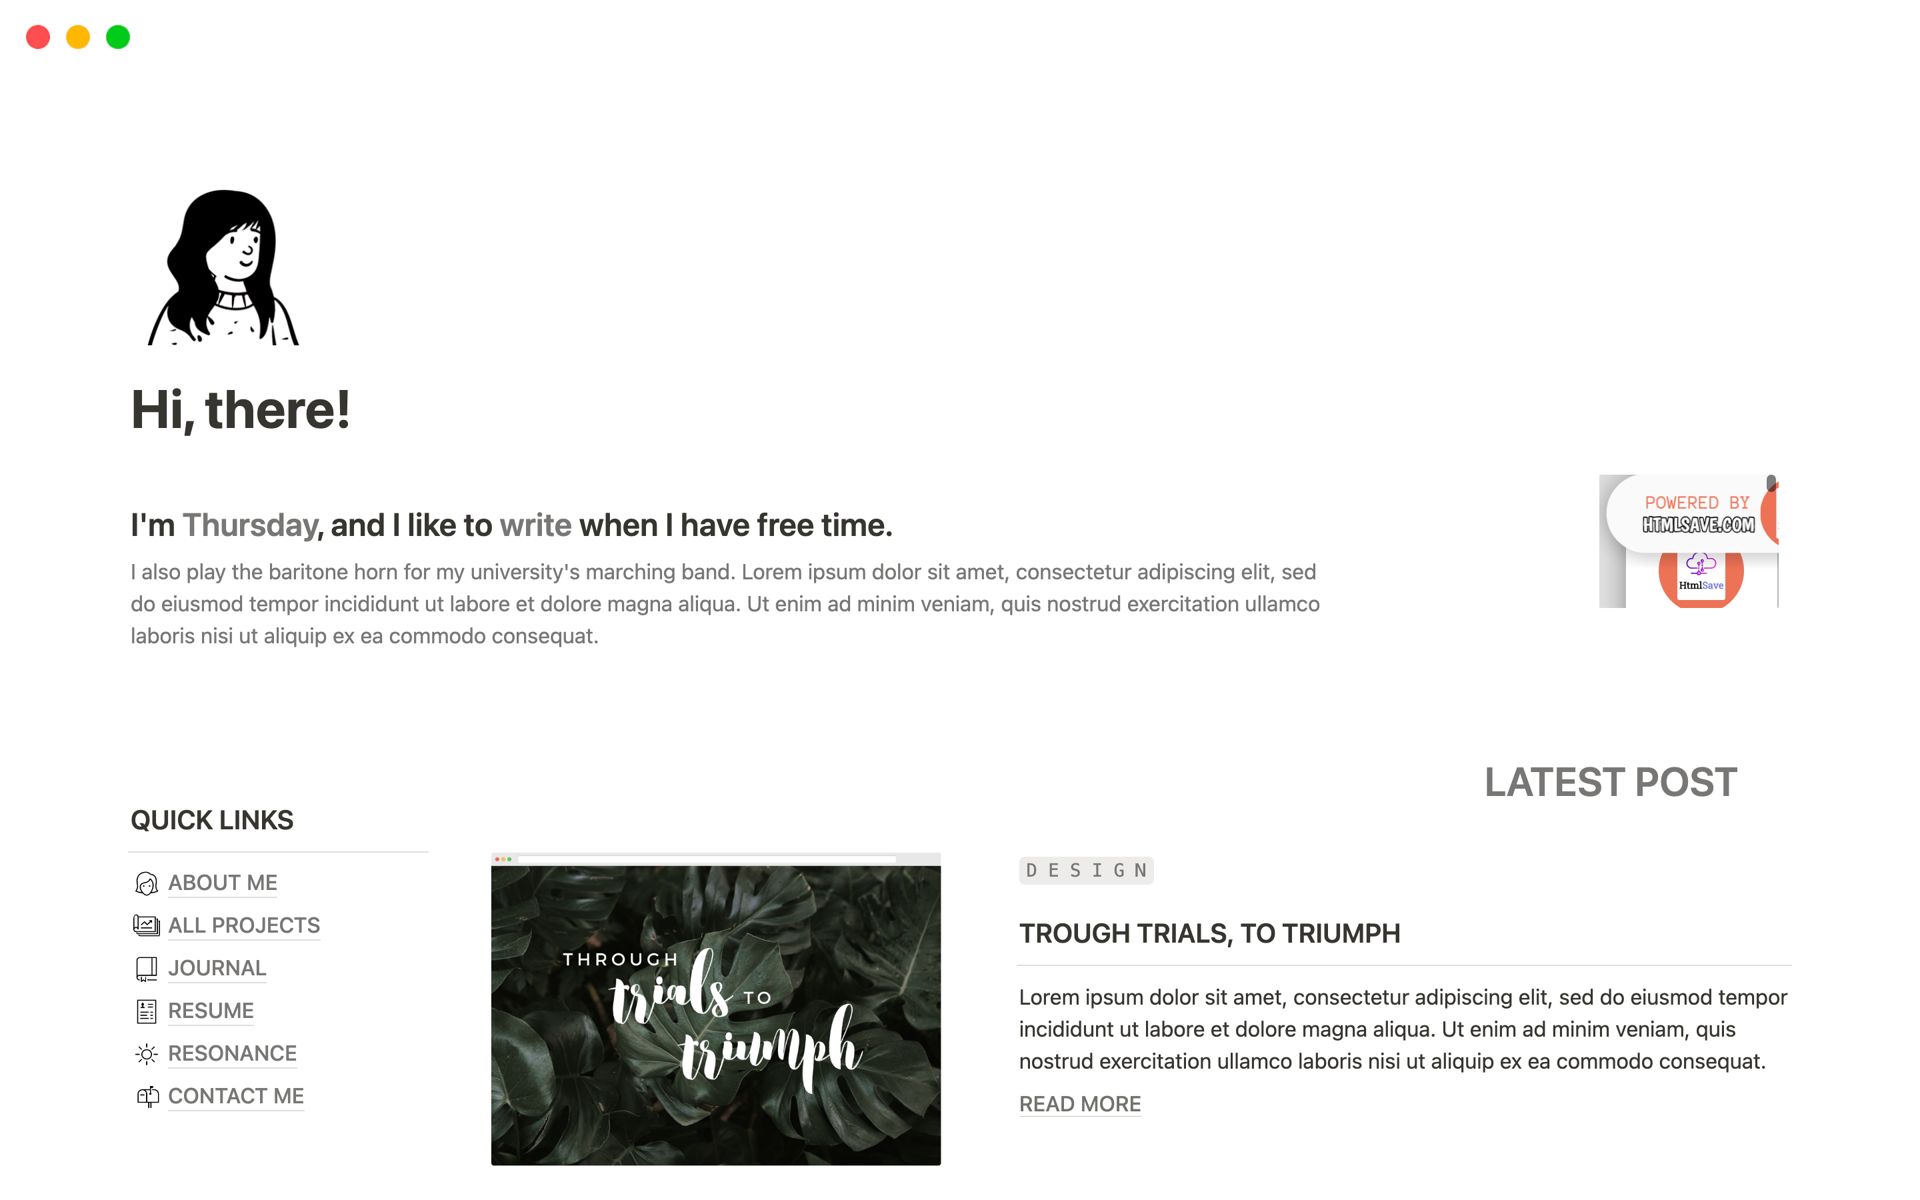 Start your own personal website/blog with this sleek and minimal Notion look.